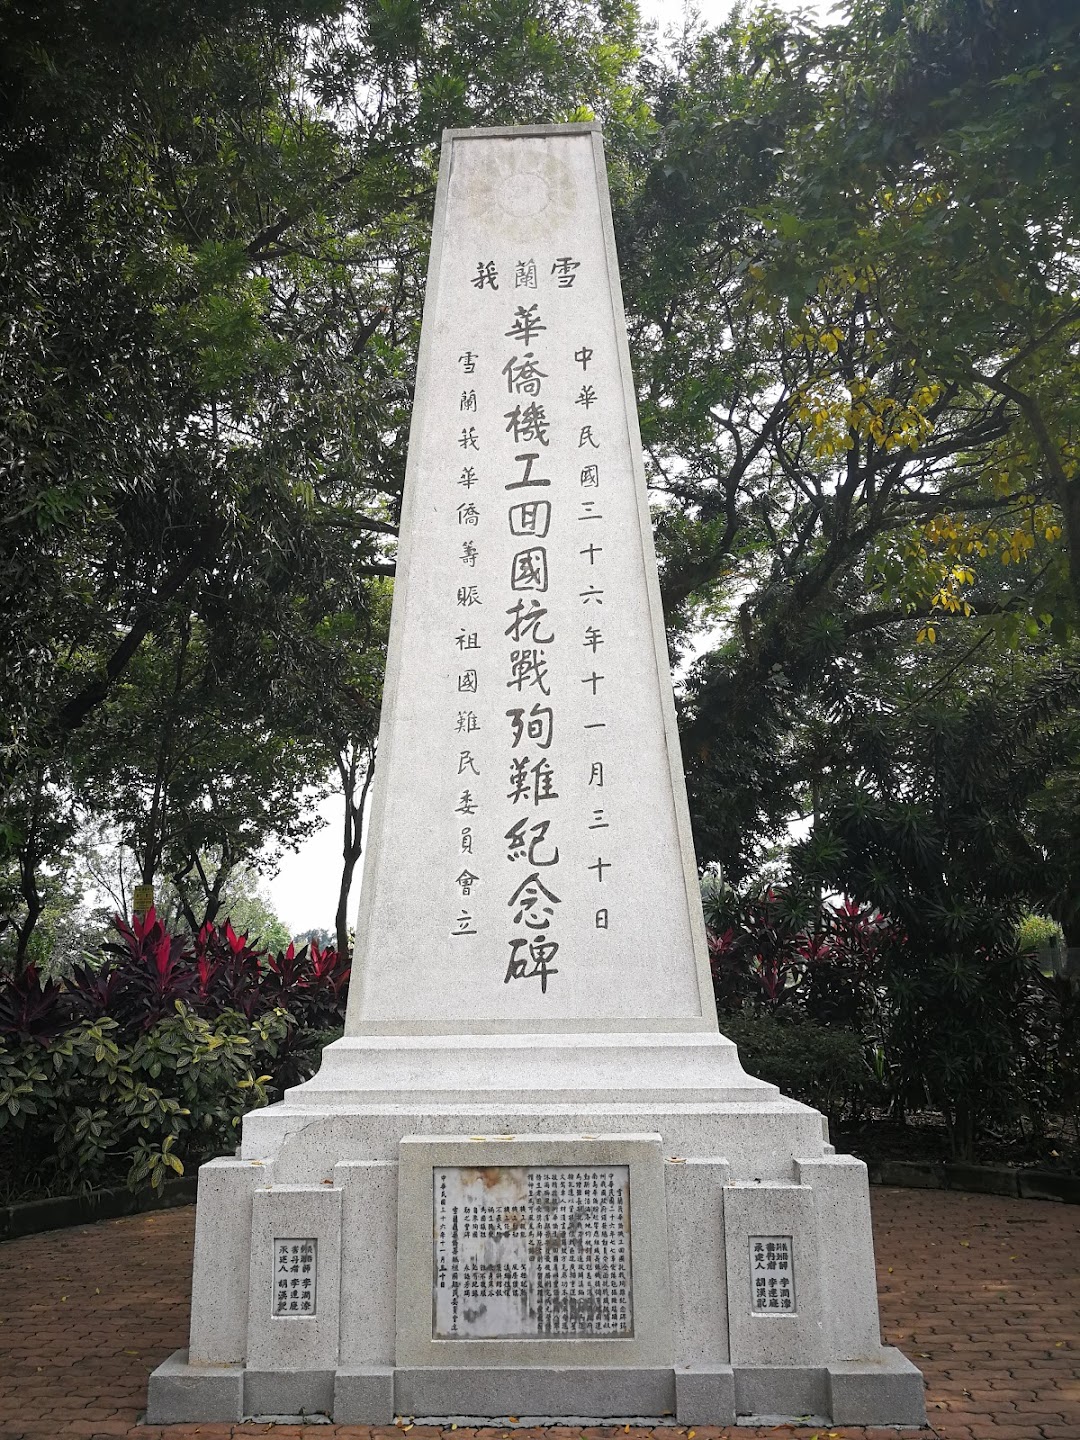 Kwong Tong Cemetery KL temple (New temple)